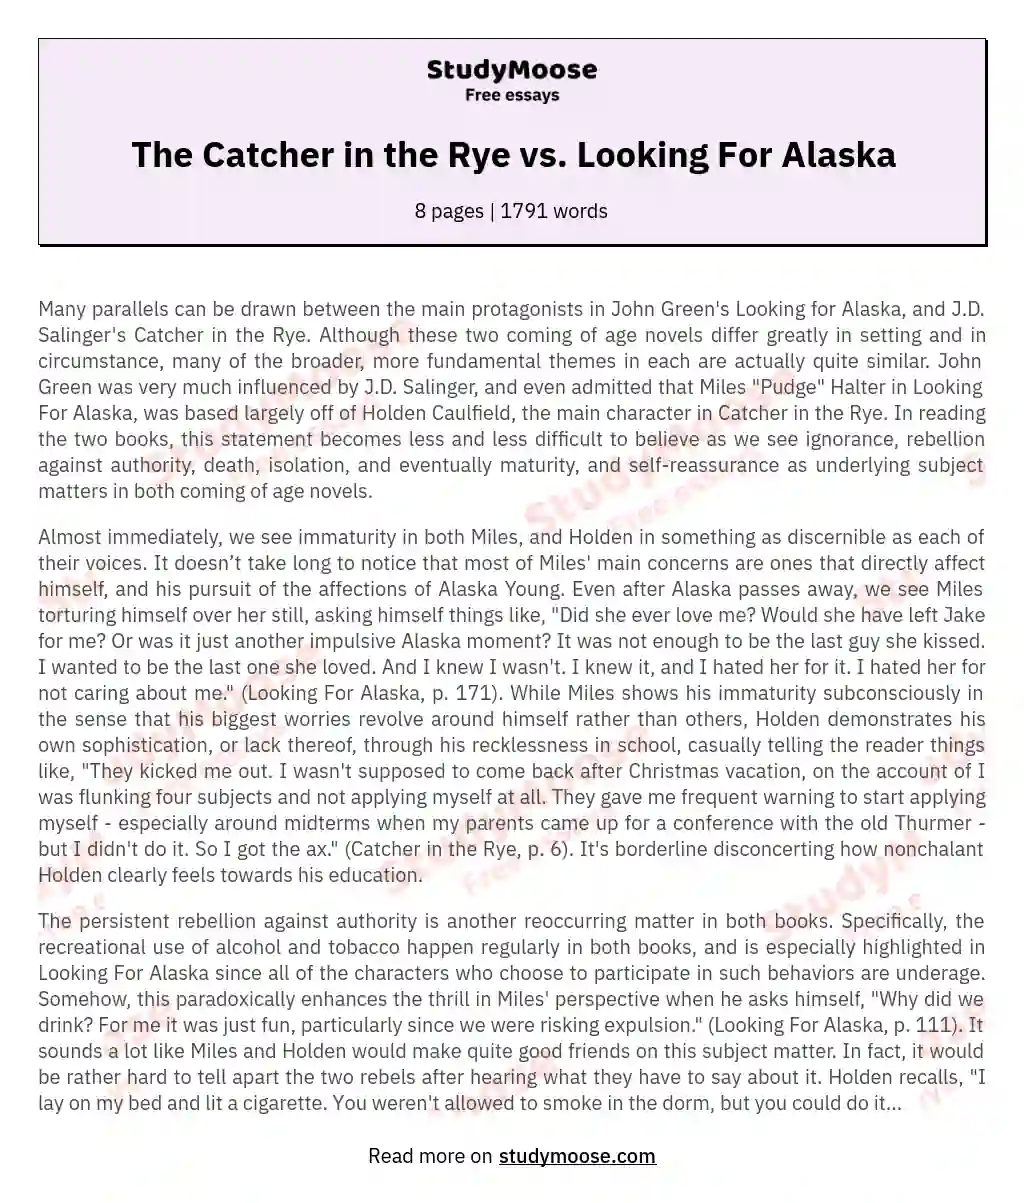 The Catcher in the Rye vs. Looking For Alaska